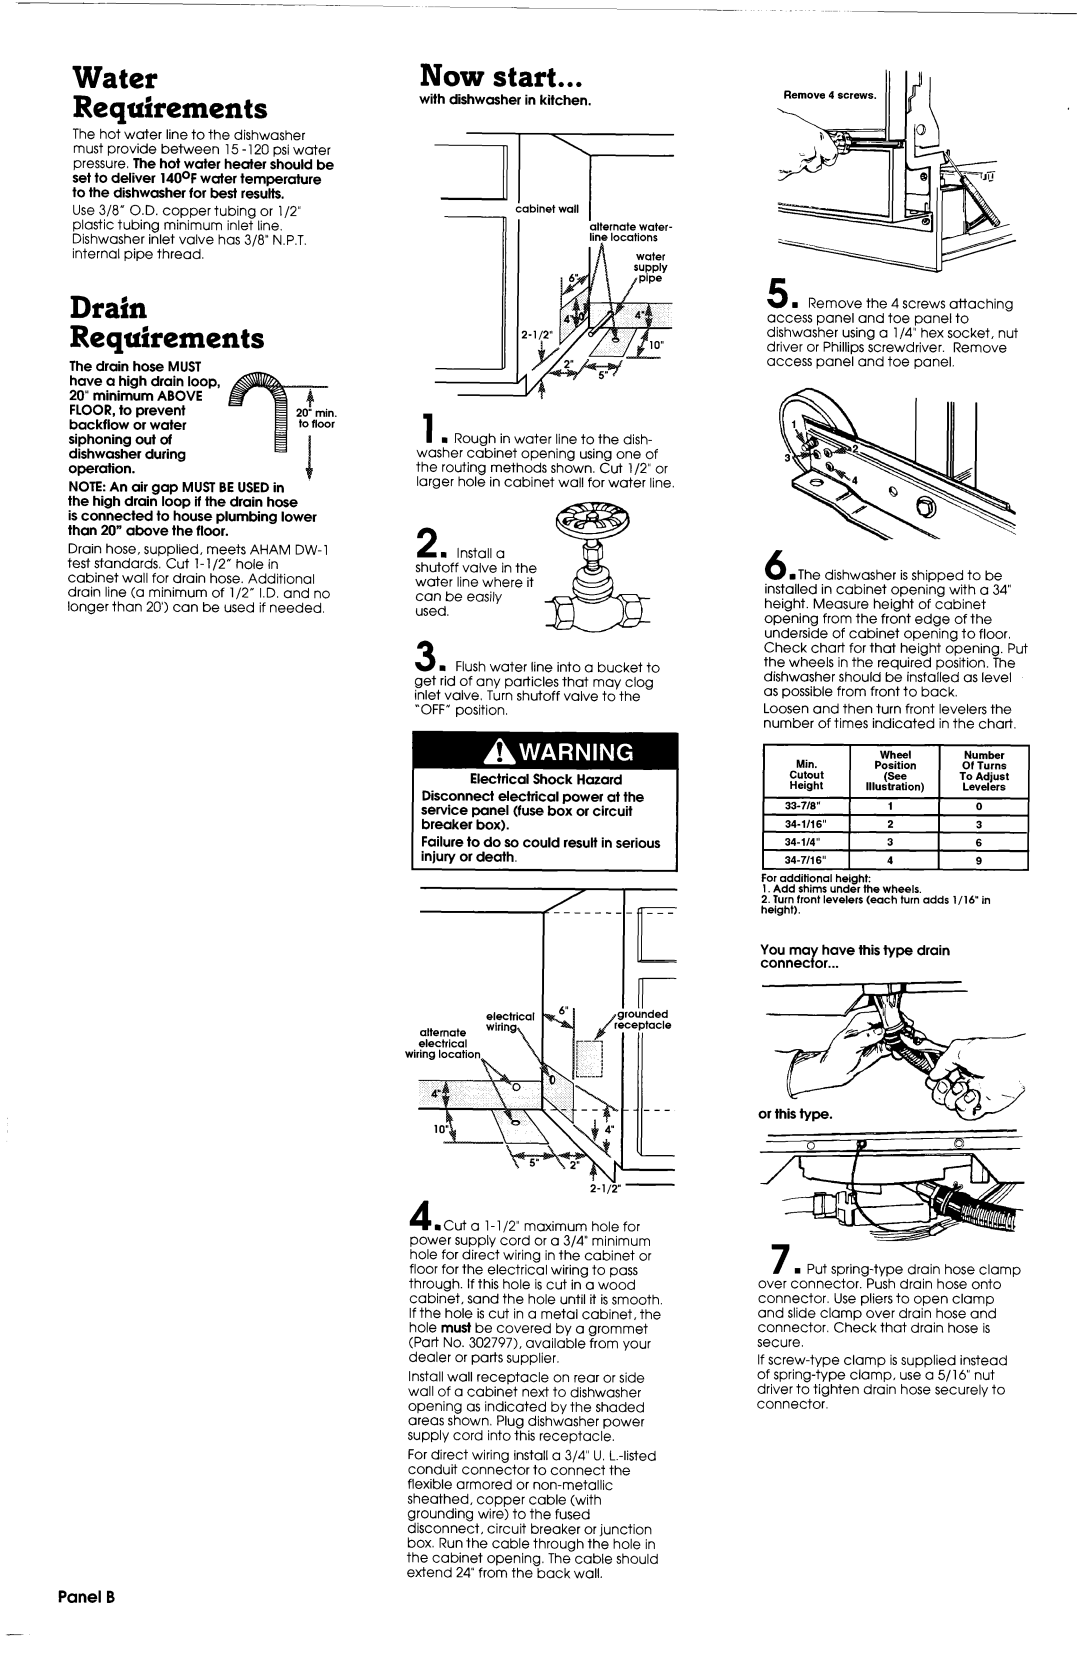 Whirlpool 3369092 REV. A installation instructions Water Requirements, Drain Requfrements, Now start, Panel B, I-----r 